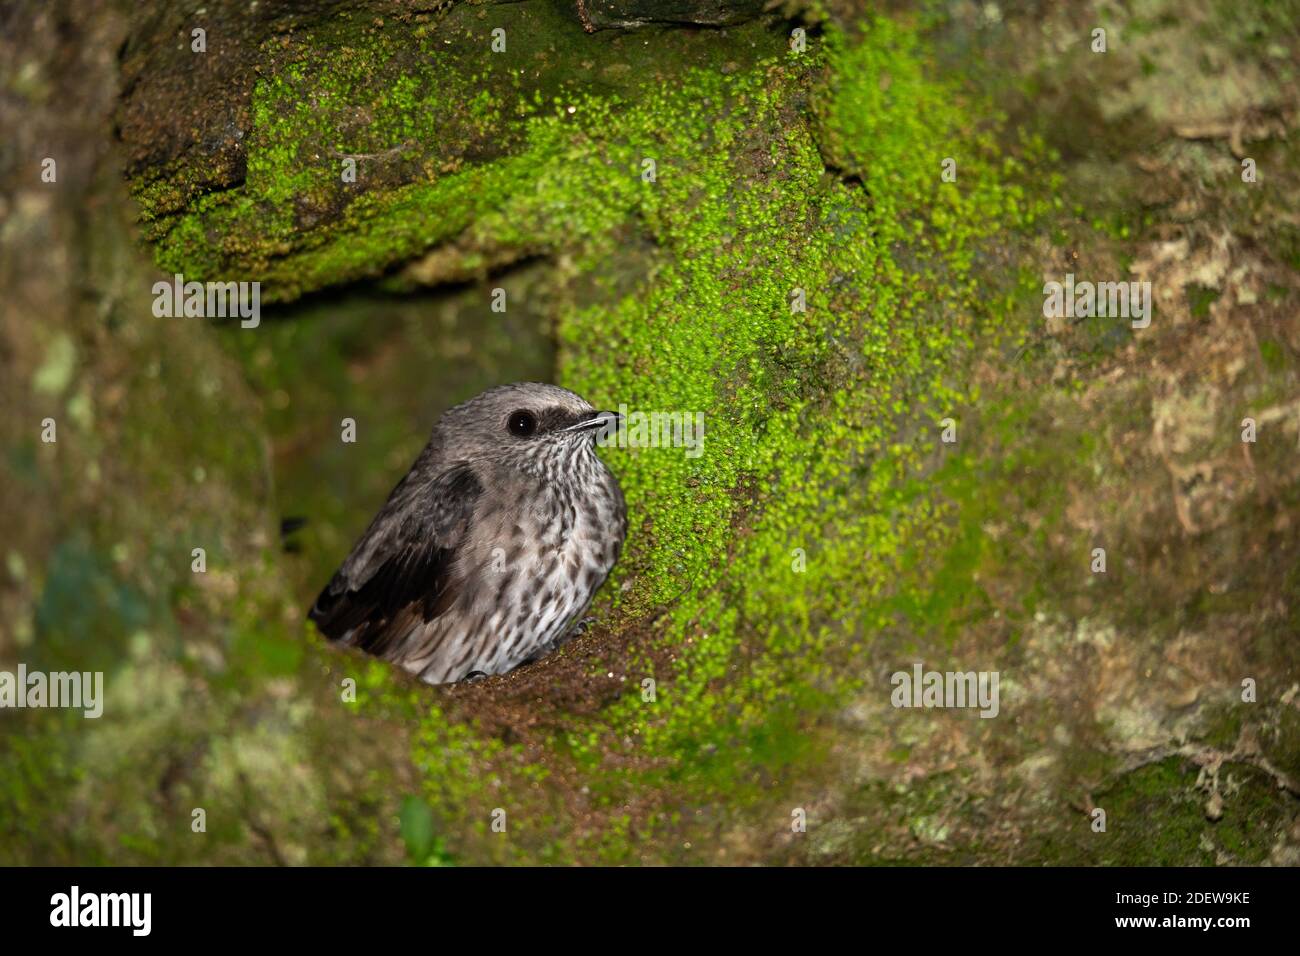 A small gray native bird in its nest. Stock Photo